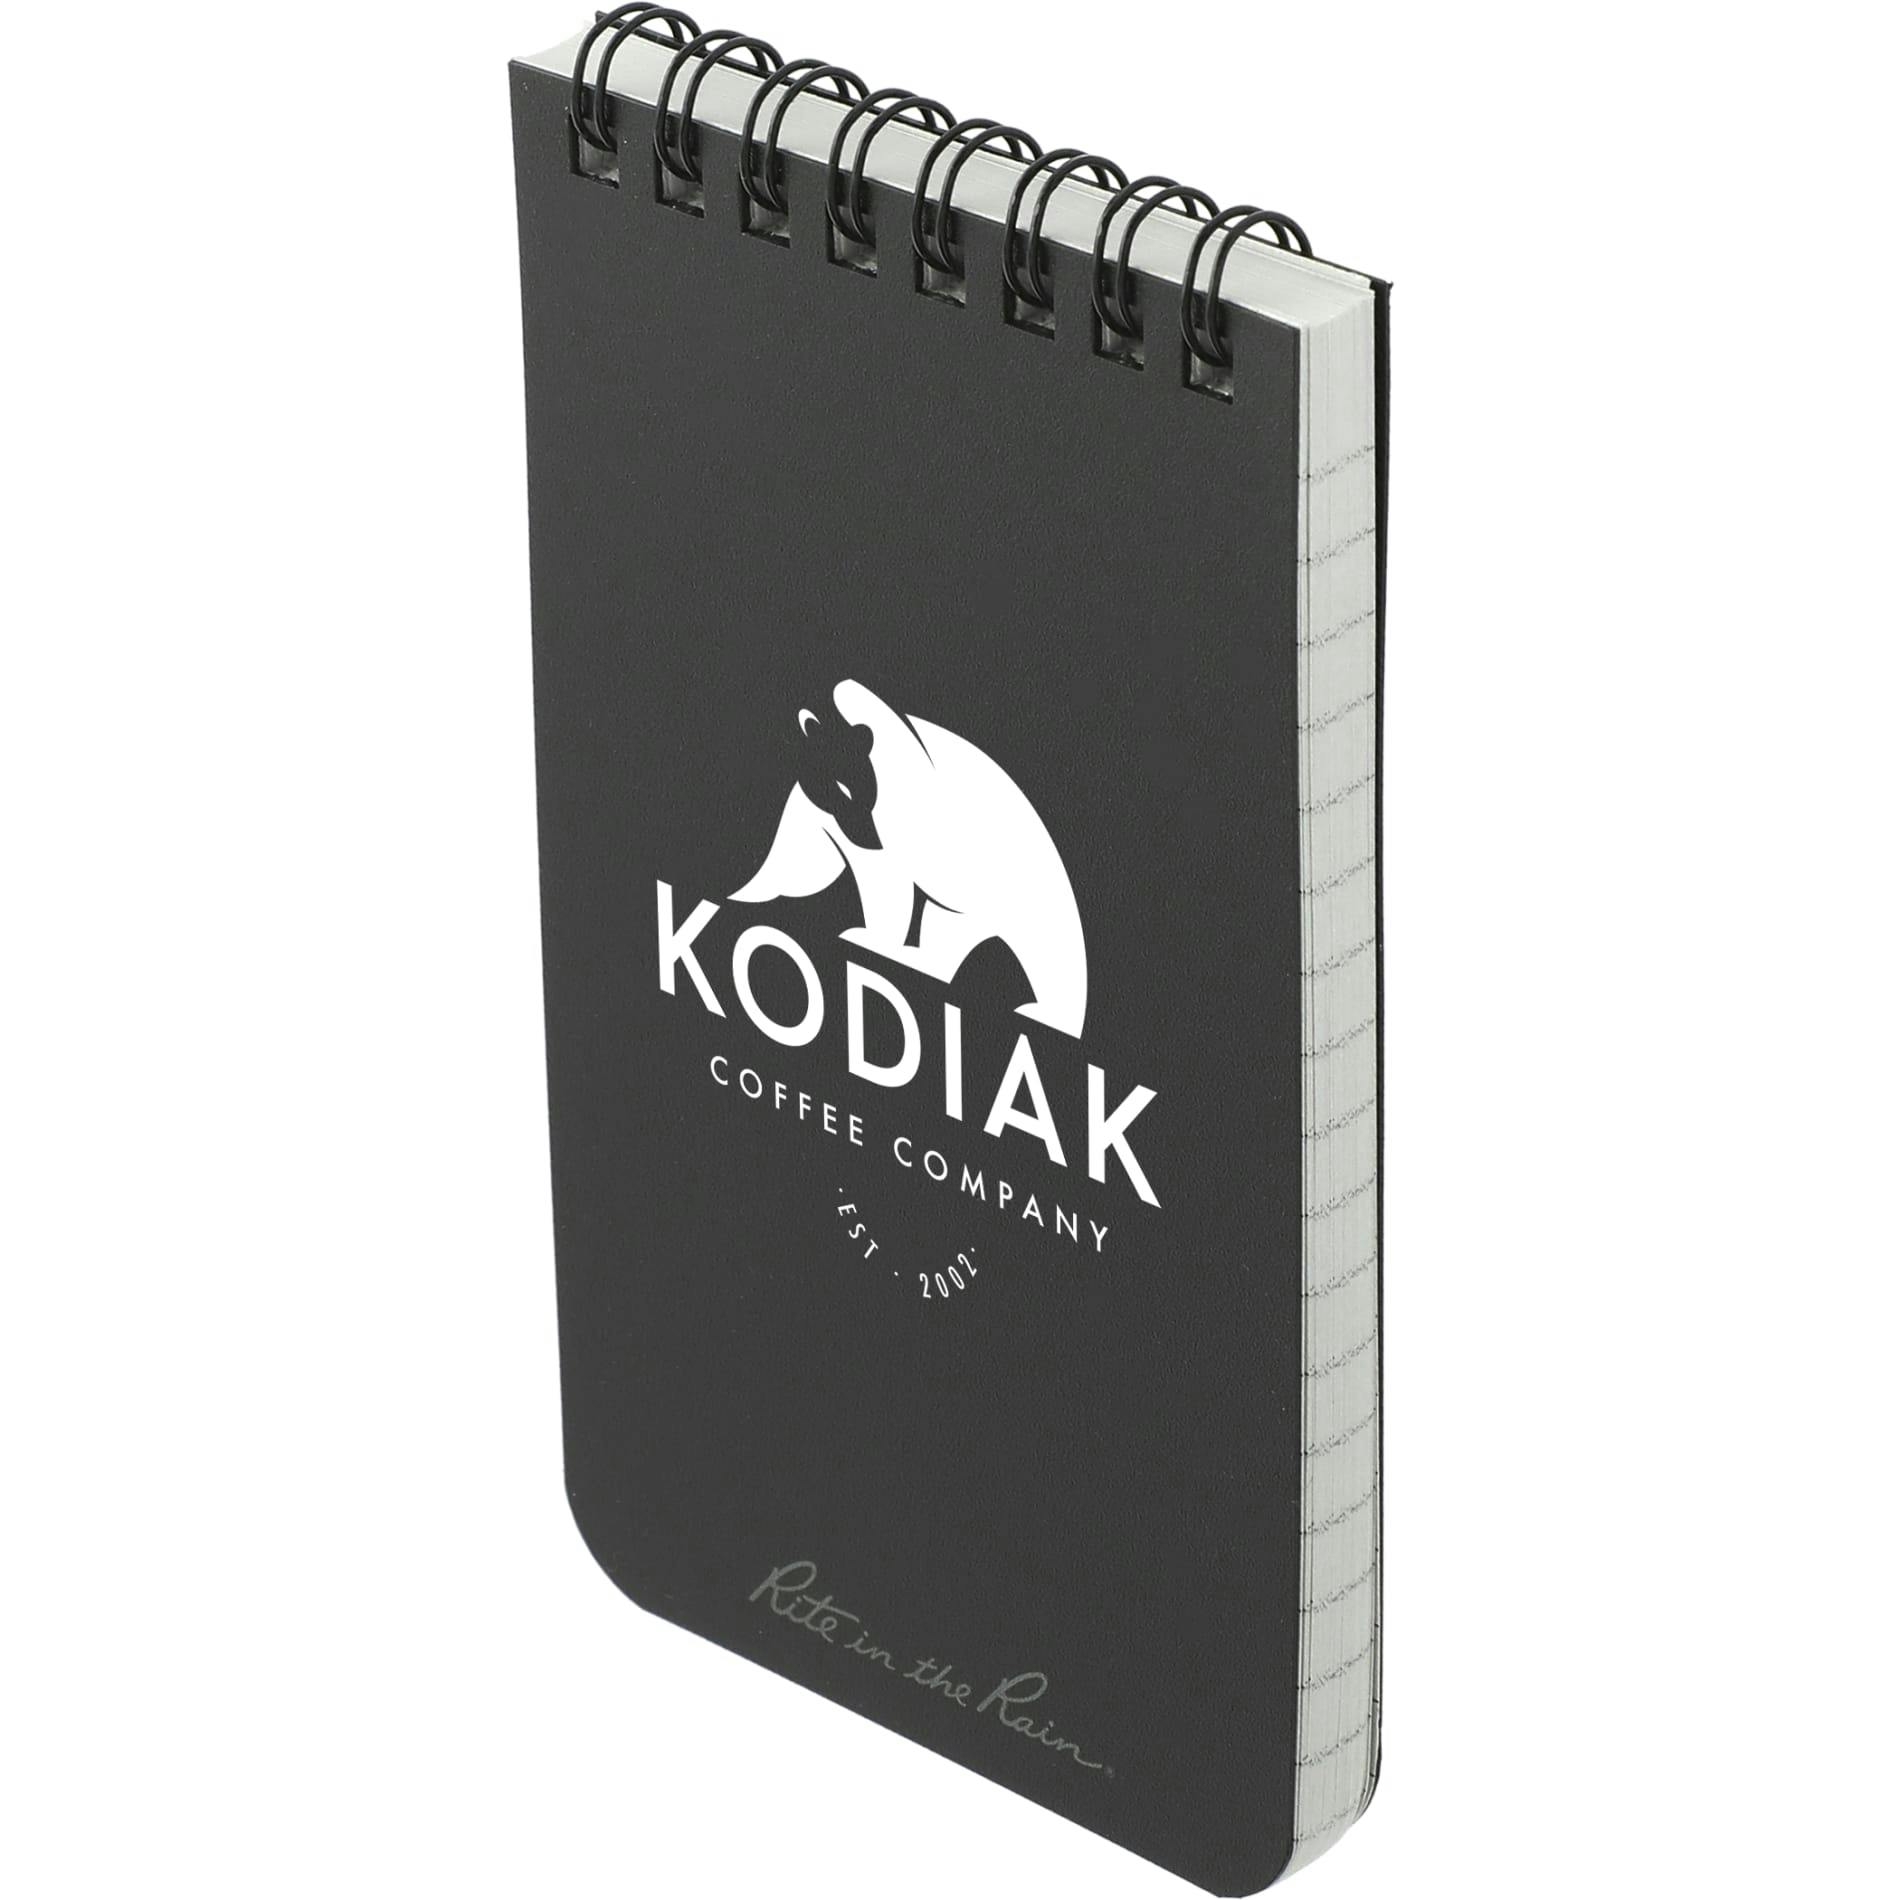 3” x 5” Rite in the Rain Top Spiral Notebook - additional Image 2